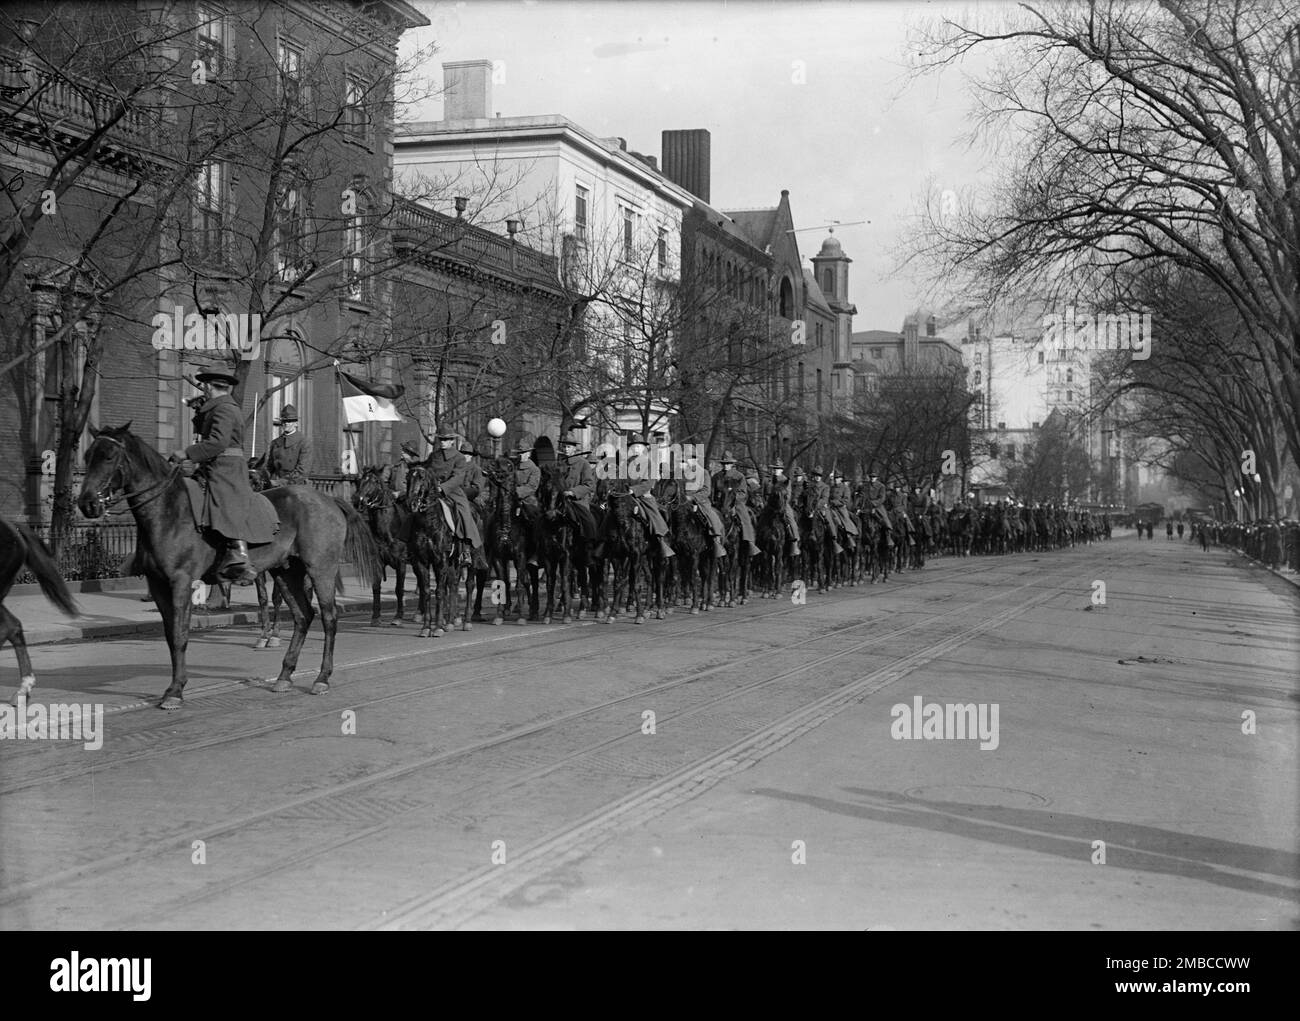 Funeral of Augustus Peabody Gardner, 1918. 'Rep. from Massachusetts, 1902-1917. Col. Ag. O, During War. As Major in The Army'. Gardner died of pneumonia while on active duty at Macon, Georgia. He was buried in Arlington National Cemetery. Stock Photo